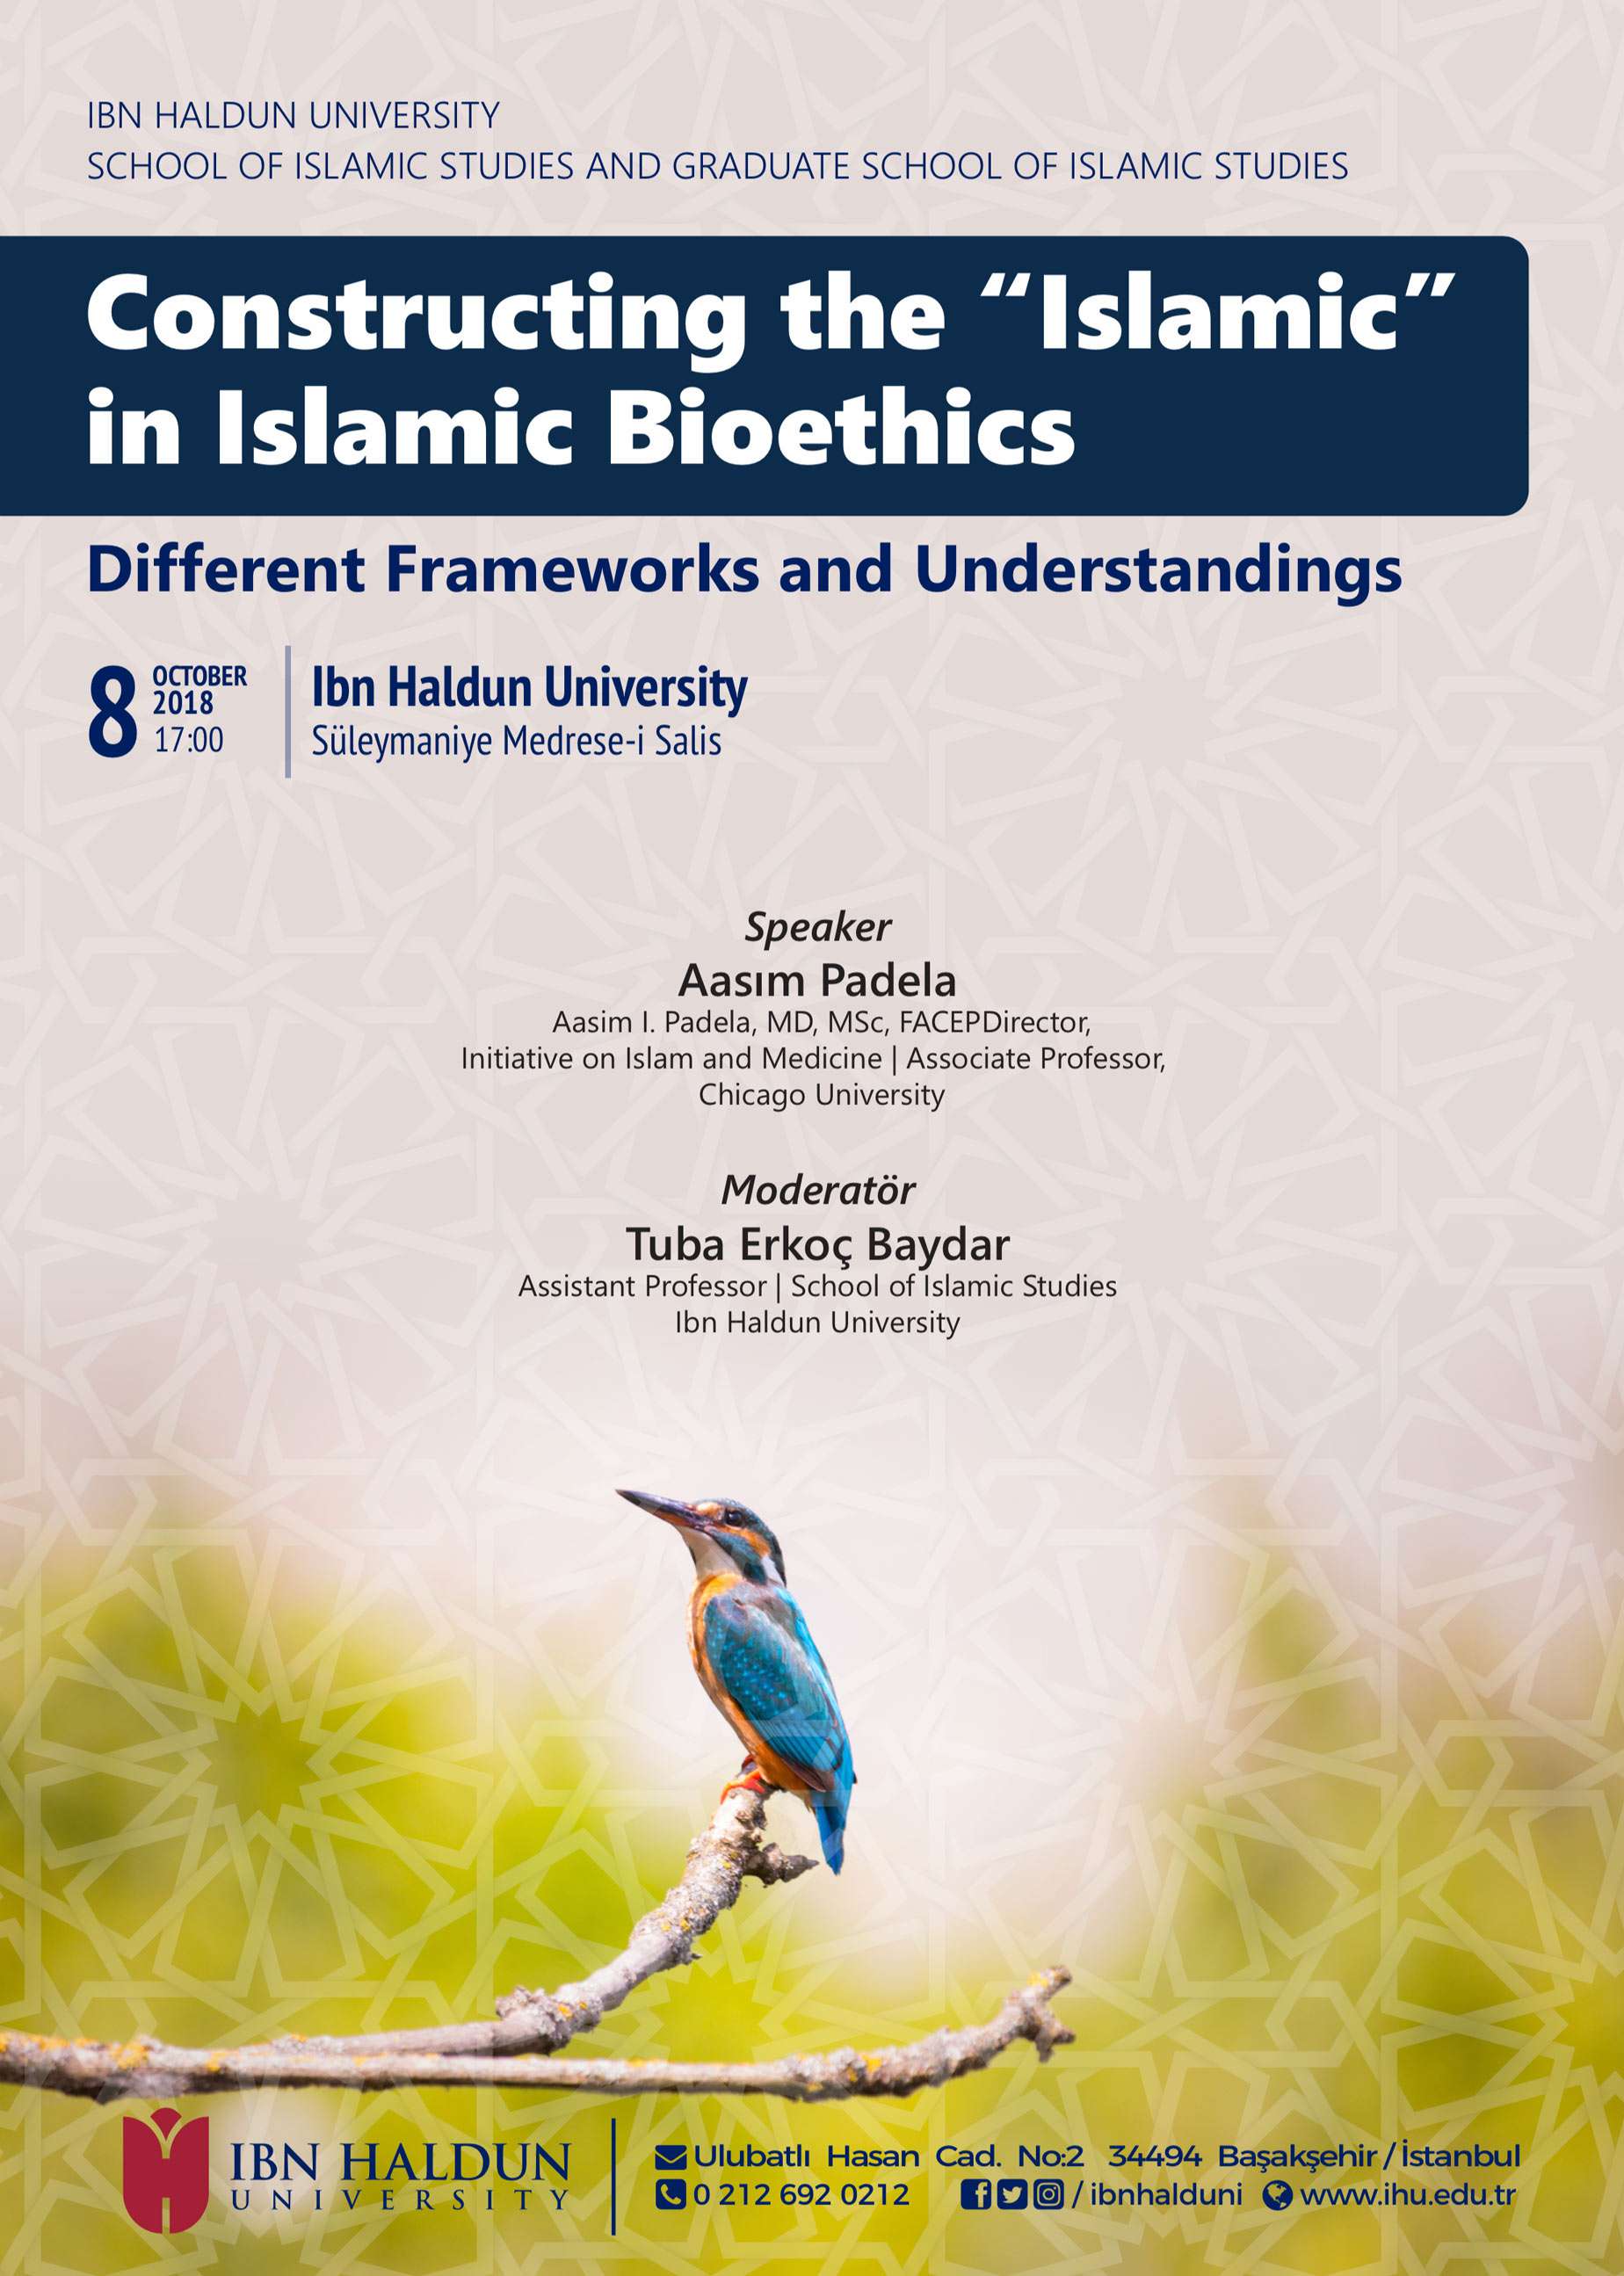 Constructing the “Islamic” in Islamic Bioethics: Different Frameworks and Understandings